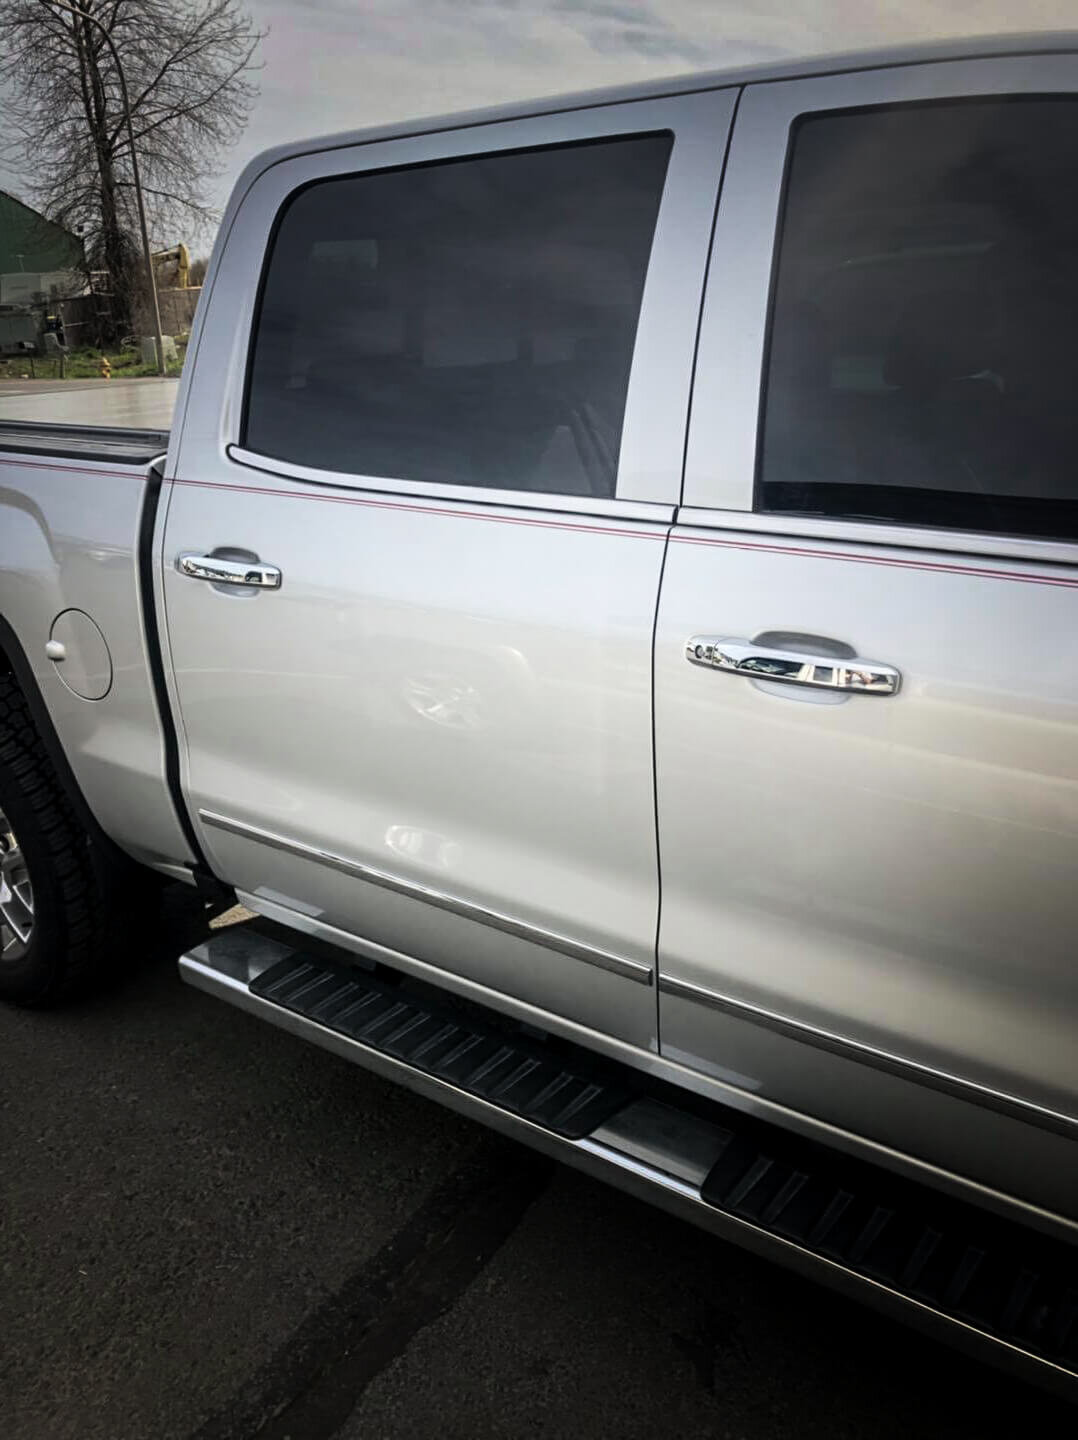 fix your dents-truck-paintless-dent-removal-vancouver-wa-1.jpg